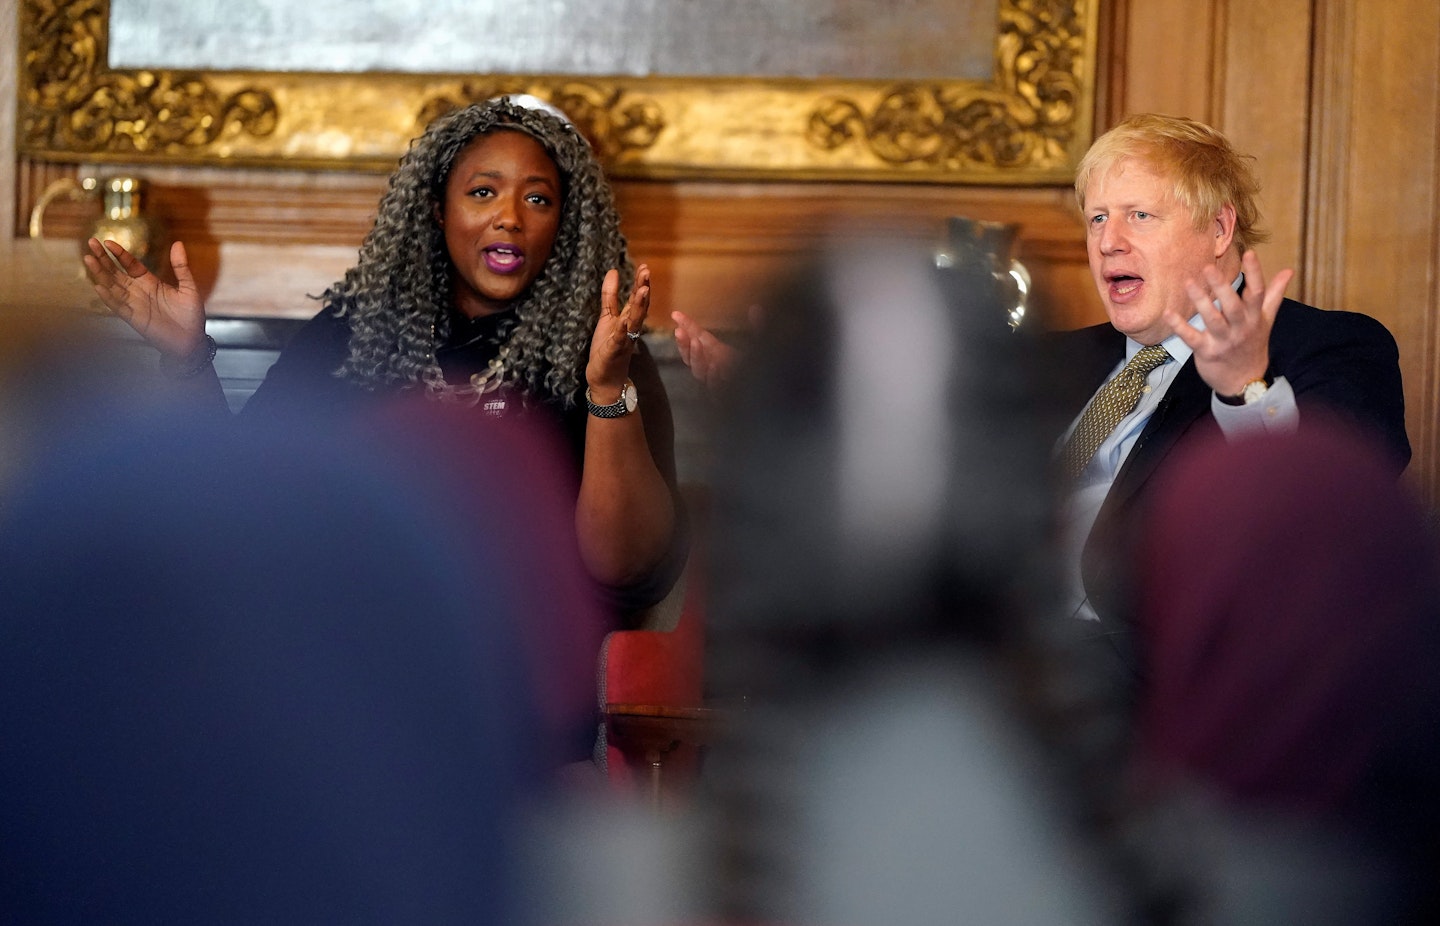 Dr Anne-Marie Imafidon and the Prime Minister speaking on an International Women's Day panel